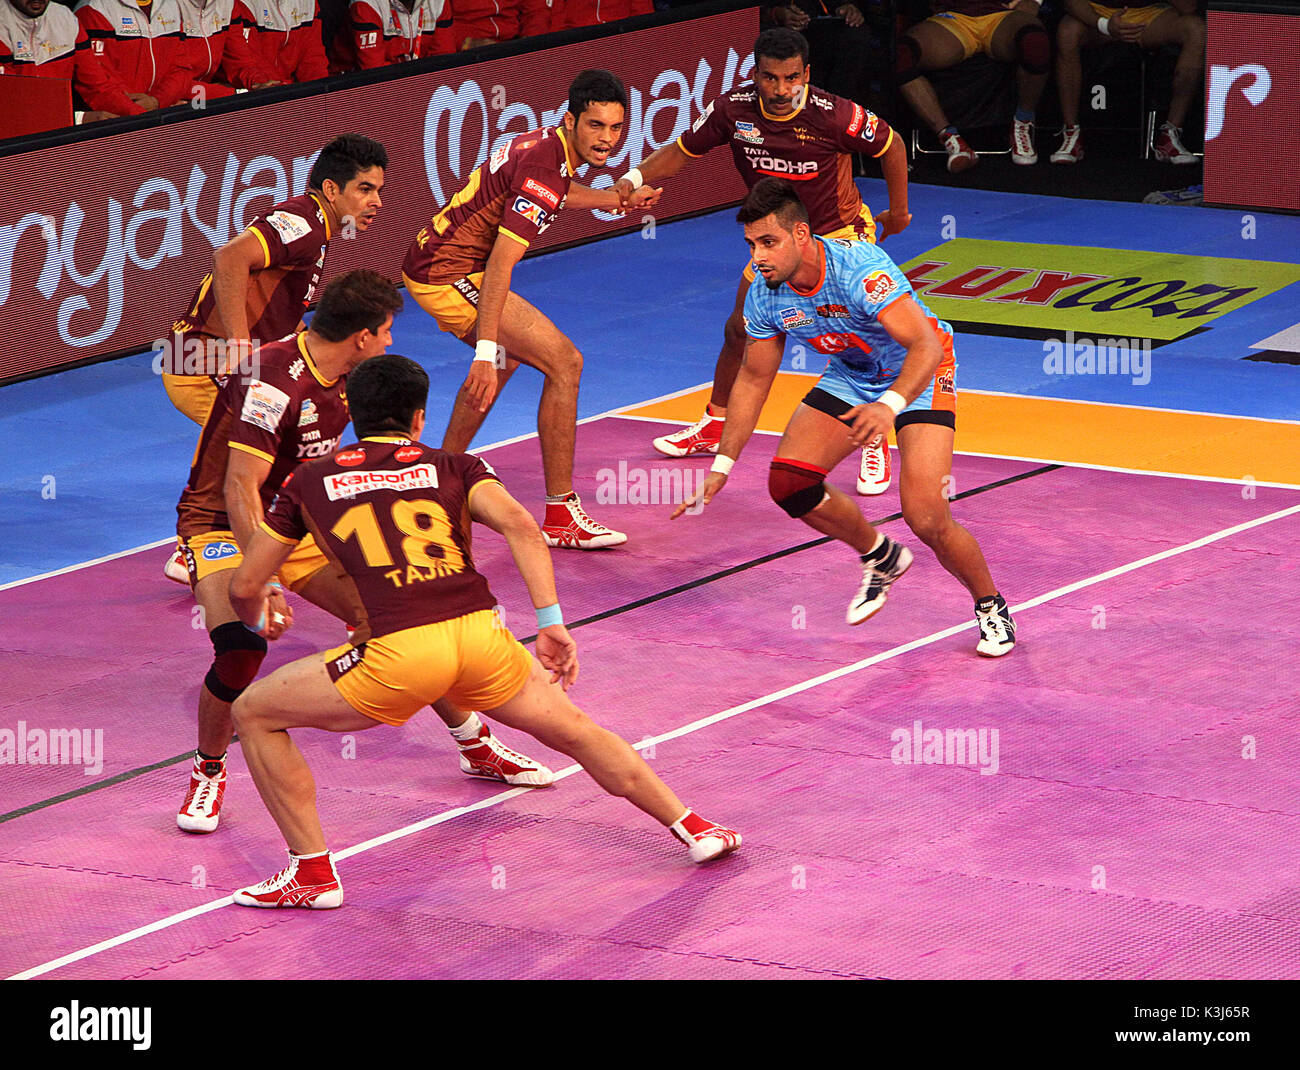 Kolkata, India. 02nd Sep, 2017. Bengal Worriers (blue jersey) and UP Yoddha  (brown jersey) players in action during the Pro Kabaddi League match on  September 2, 2017 in Kolkata. Credit: Saikat Paul/Pacific